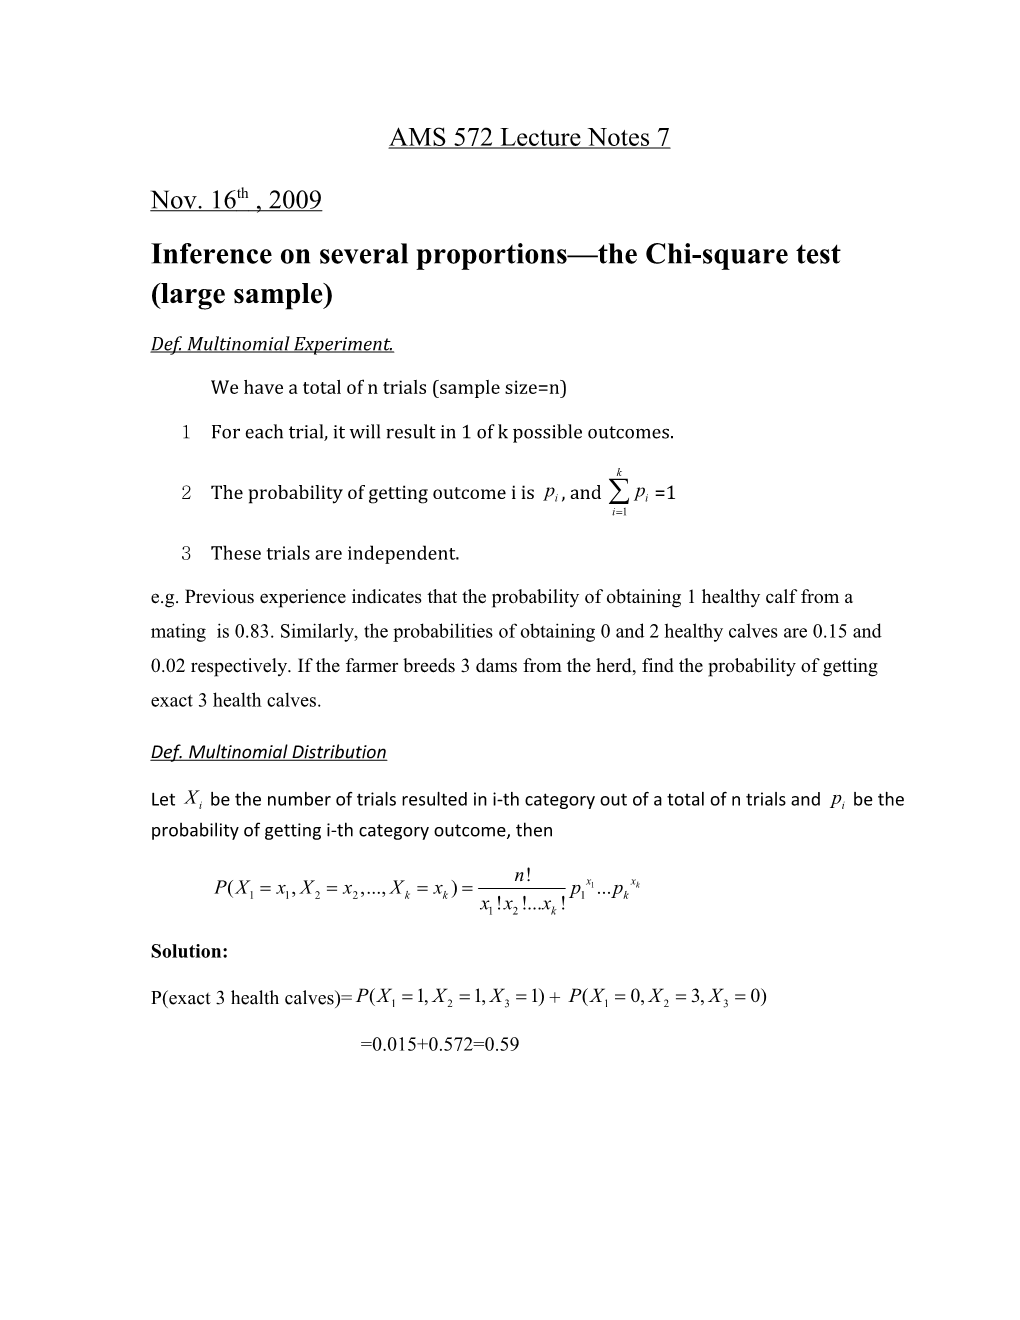 Inference on Several Proportions the Chi-Square Test (Large Sample)